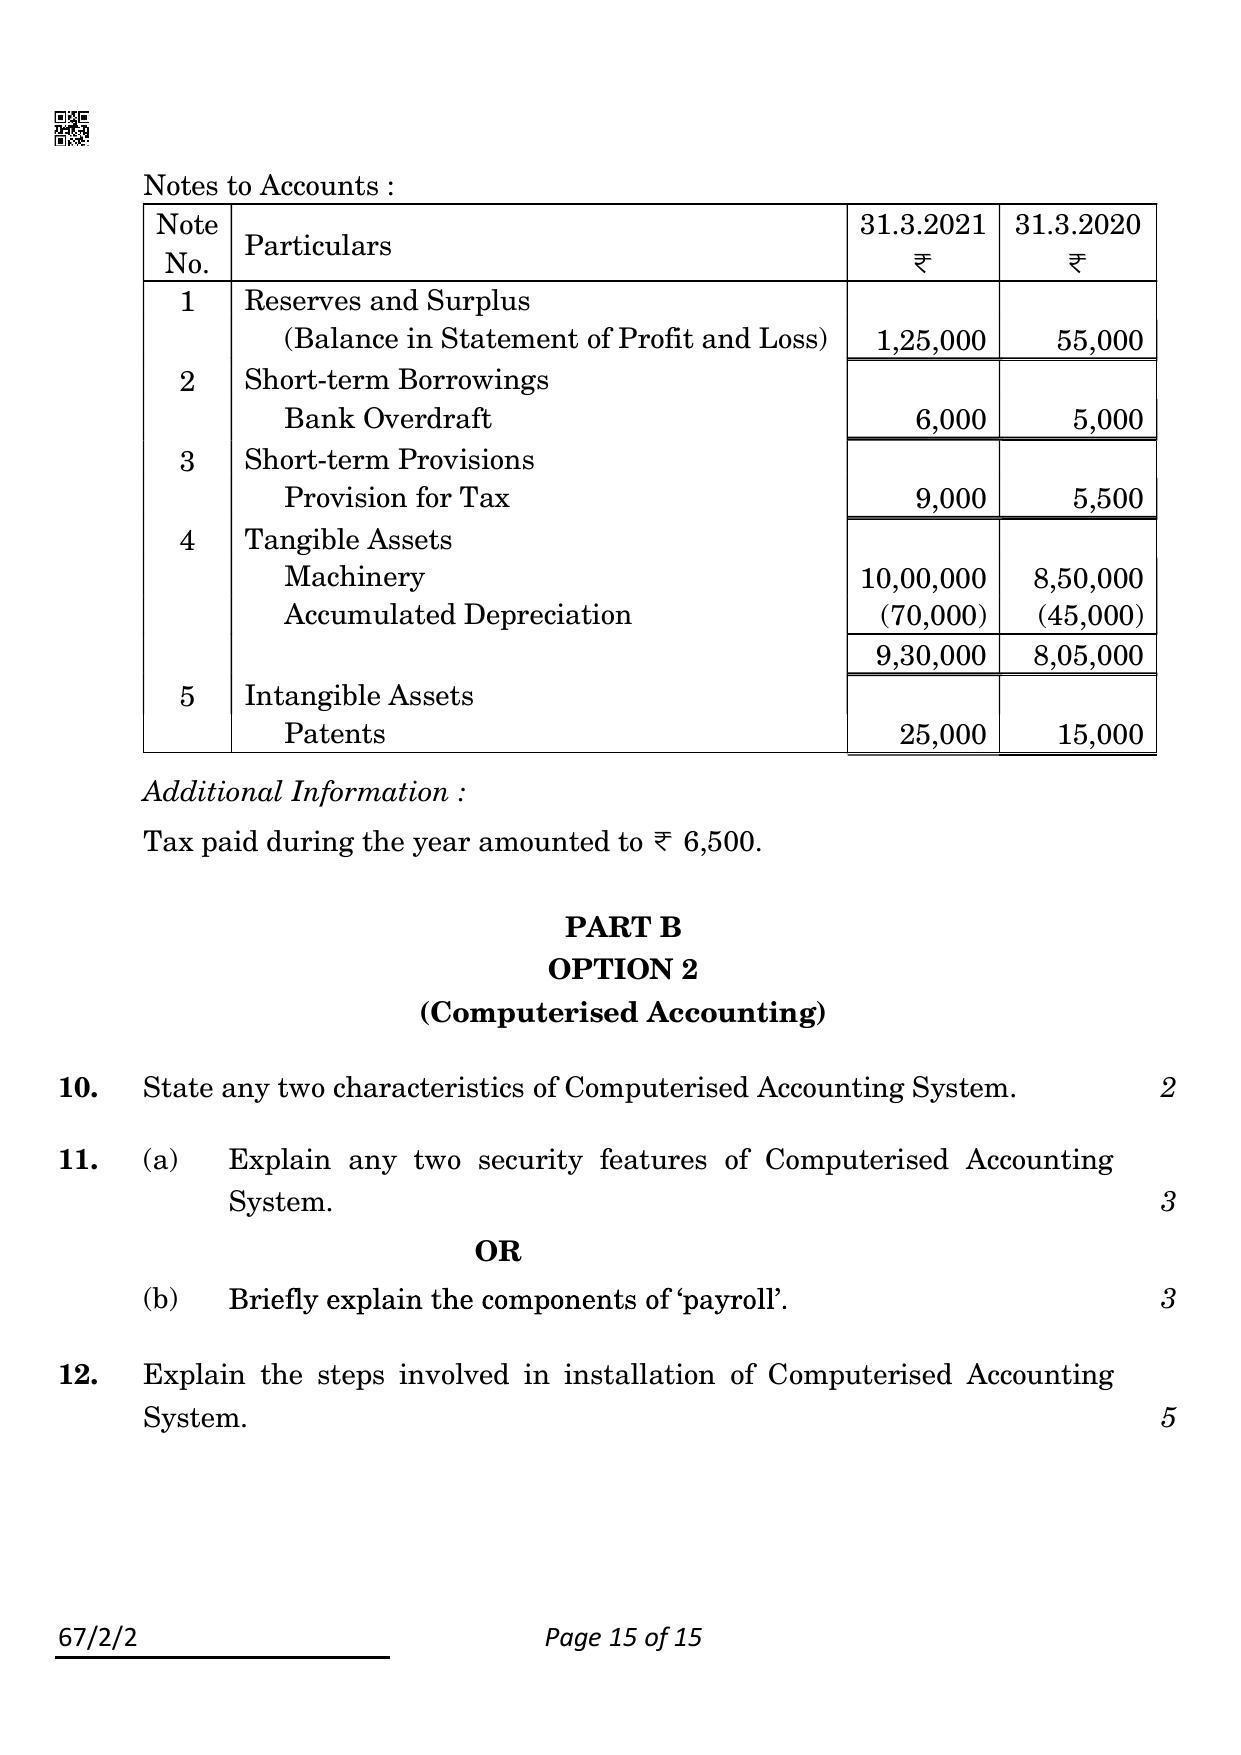 CBSE Class 12 67-2-2 Accountancy 2022 Question Paper - Page 15